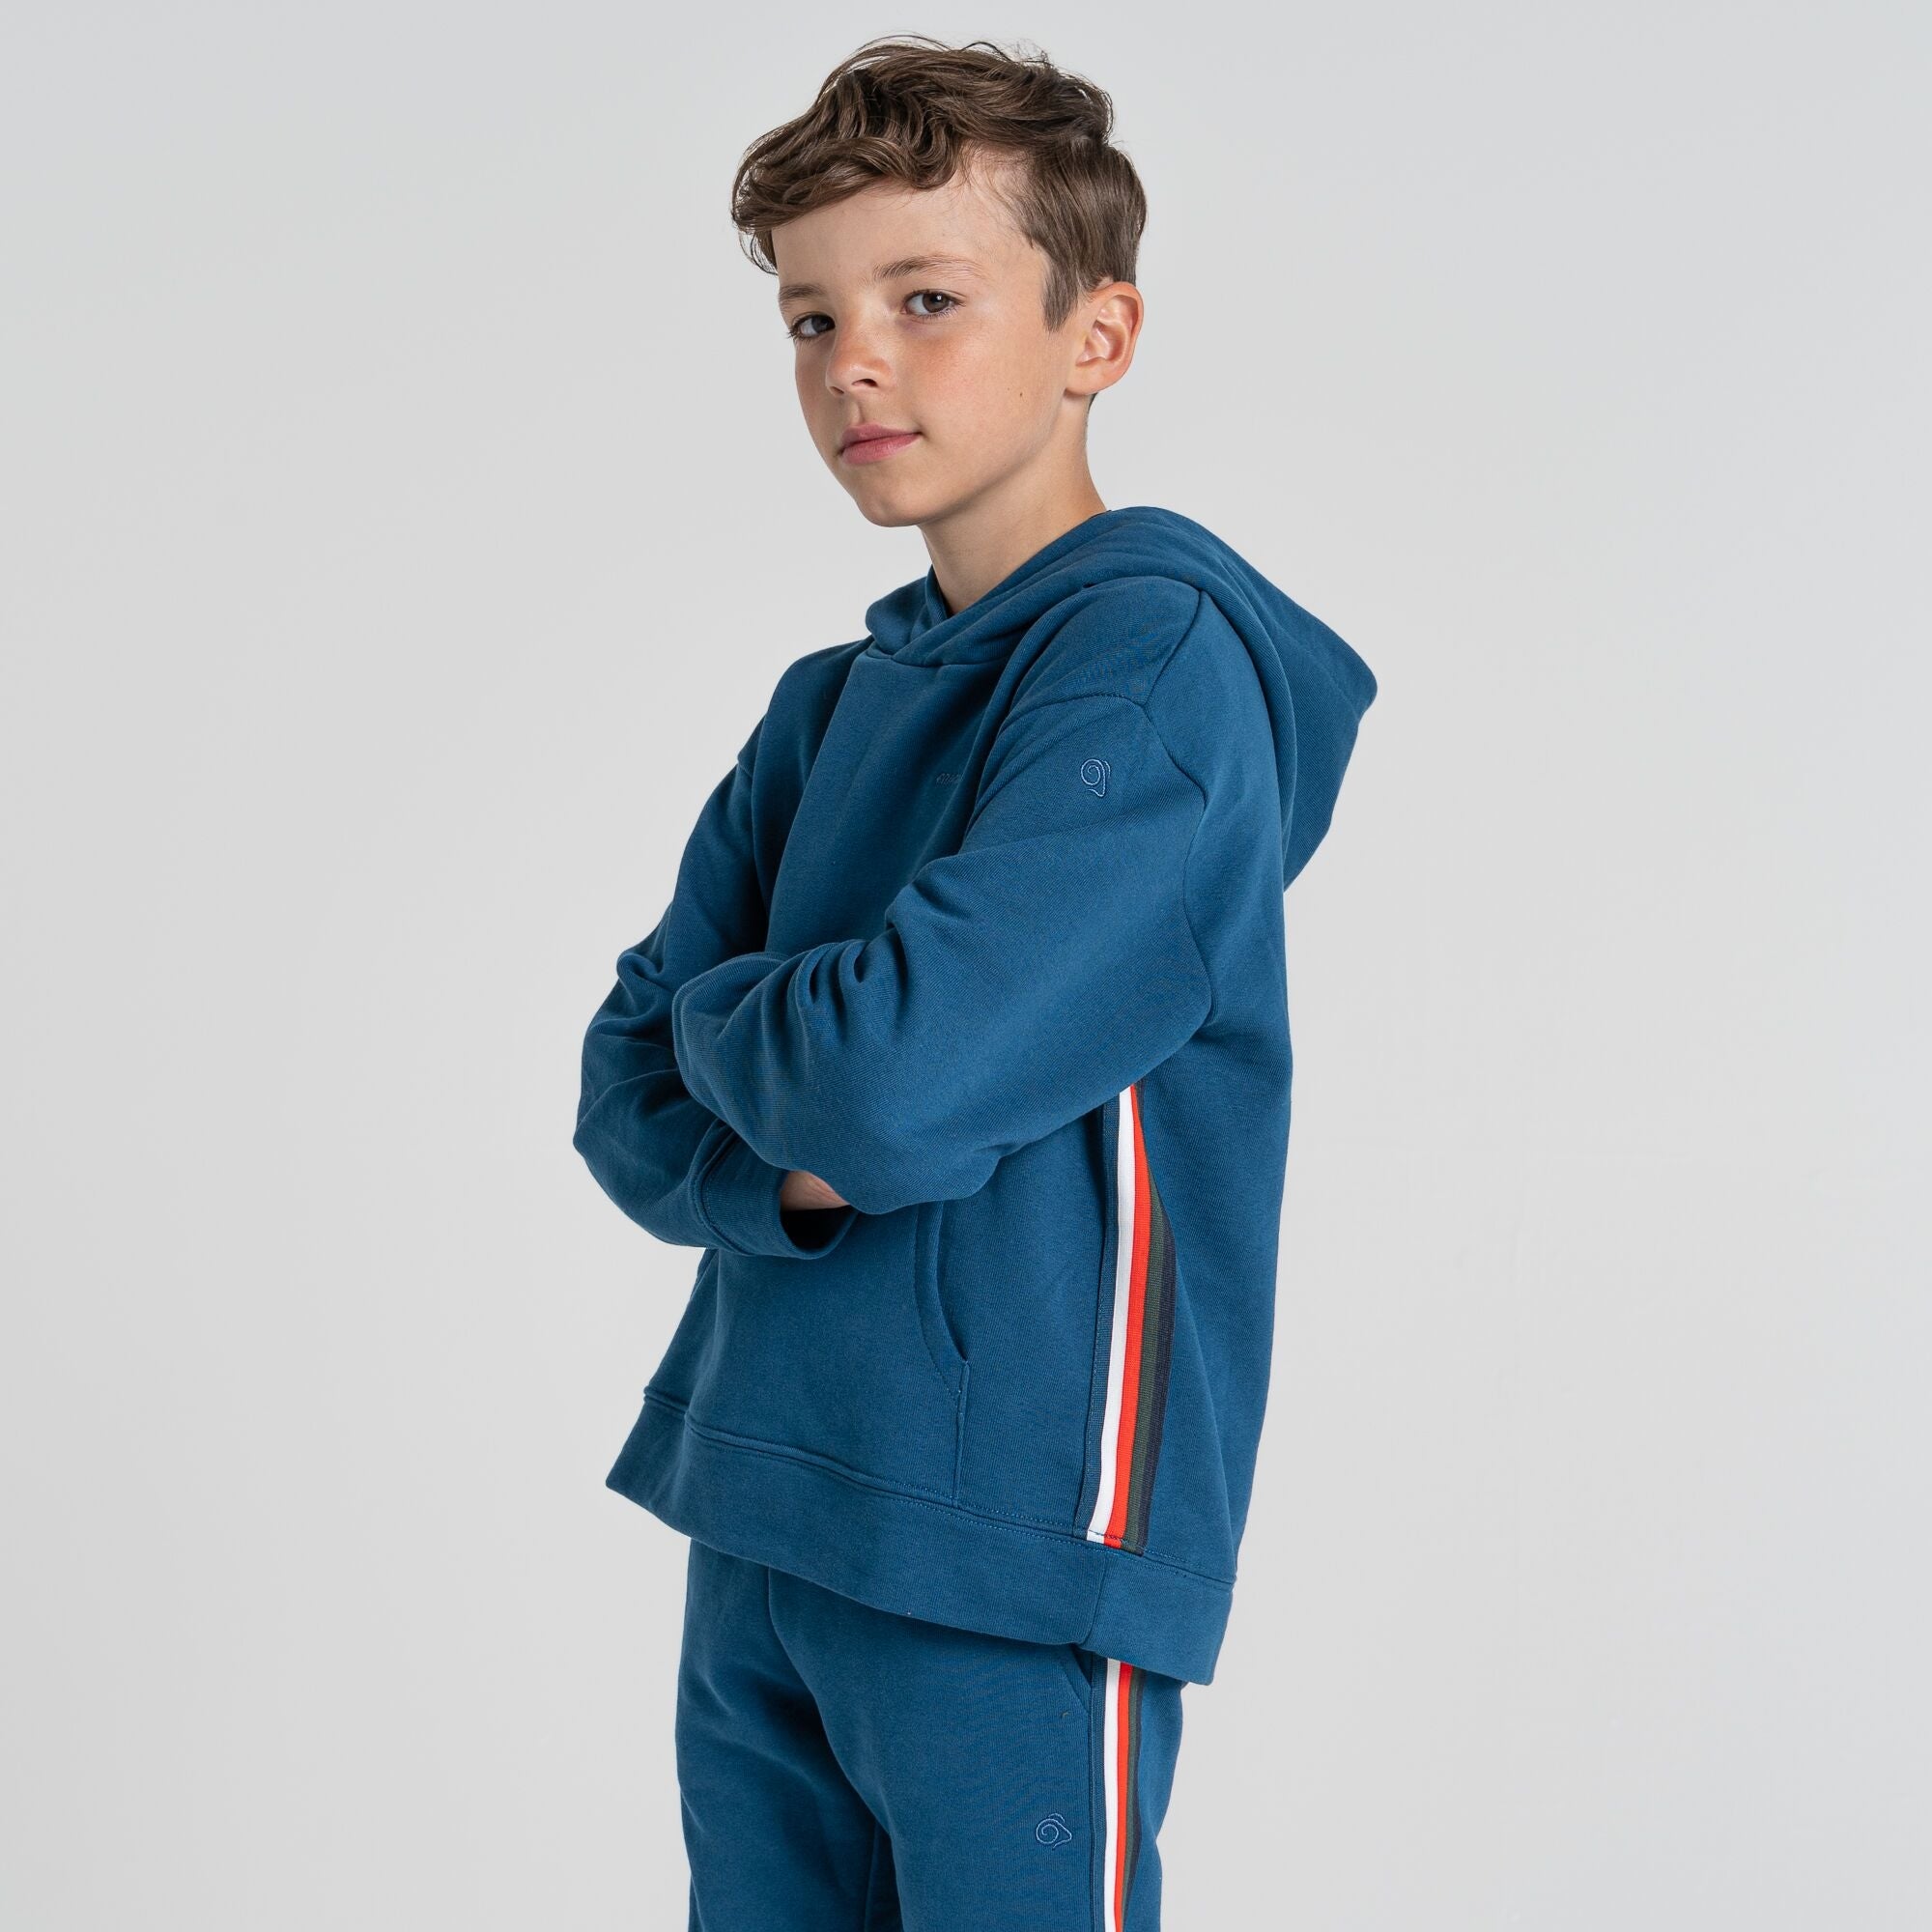 Kids' Insect Shield® Baylor Hooded Top | Poseidon Blue